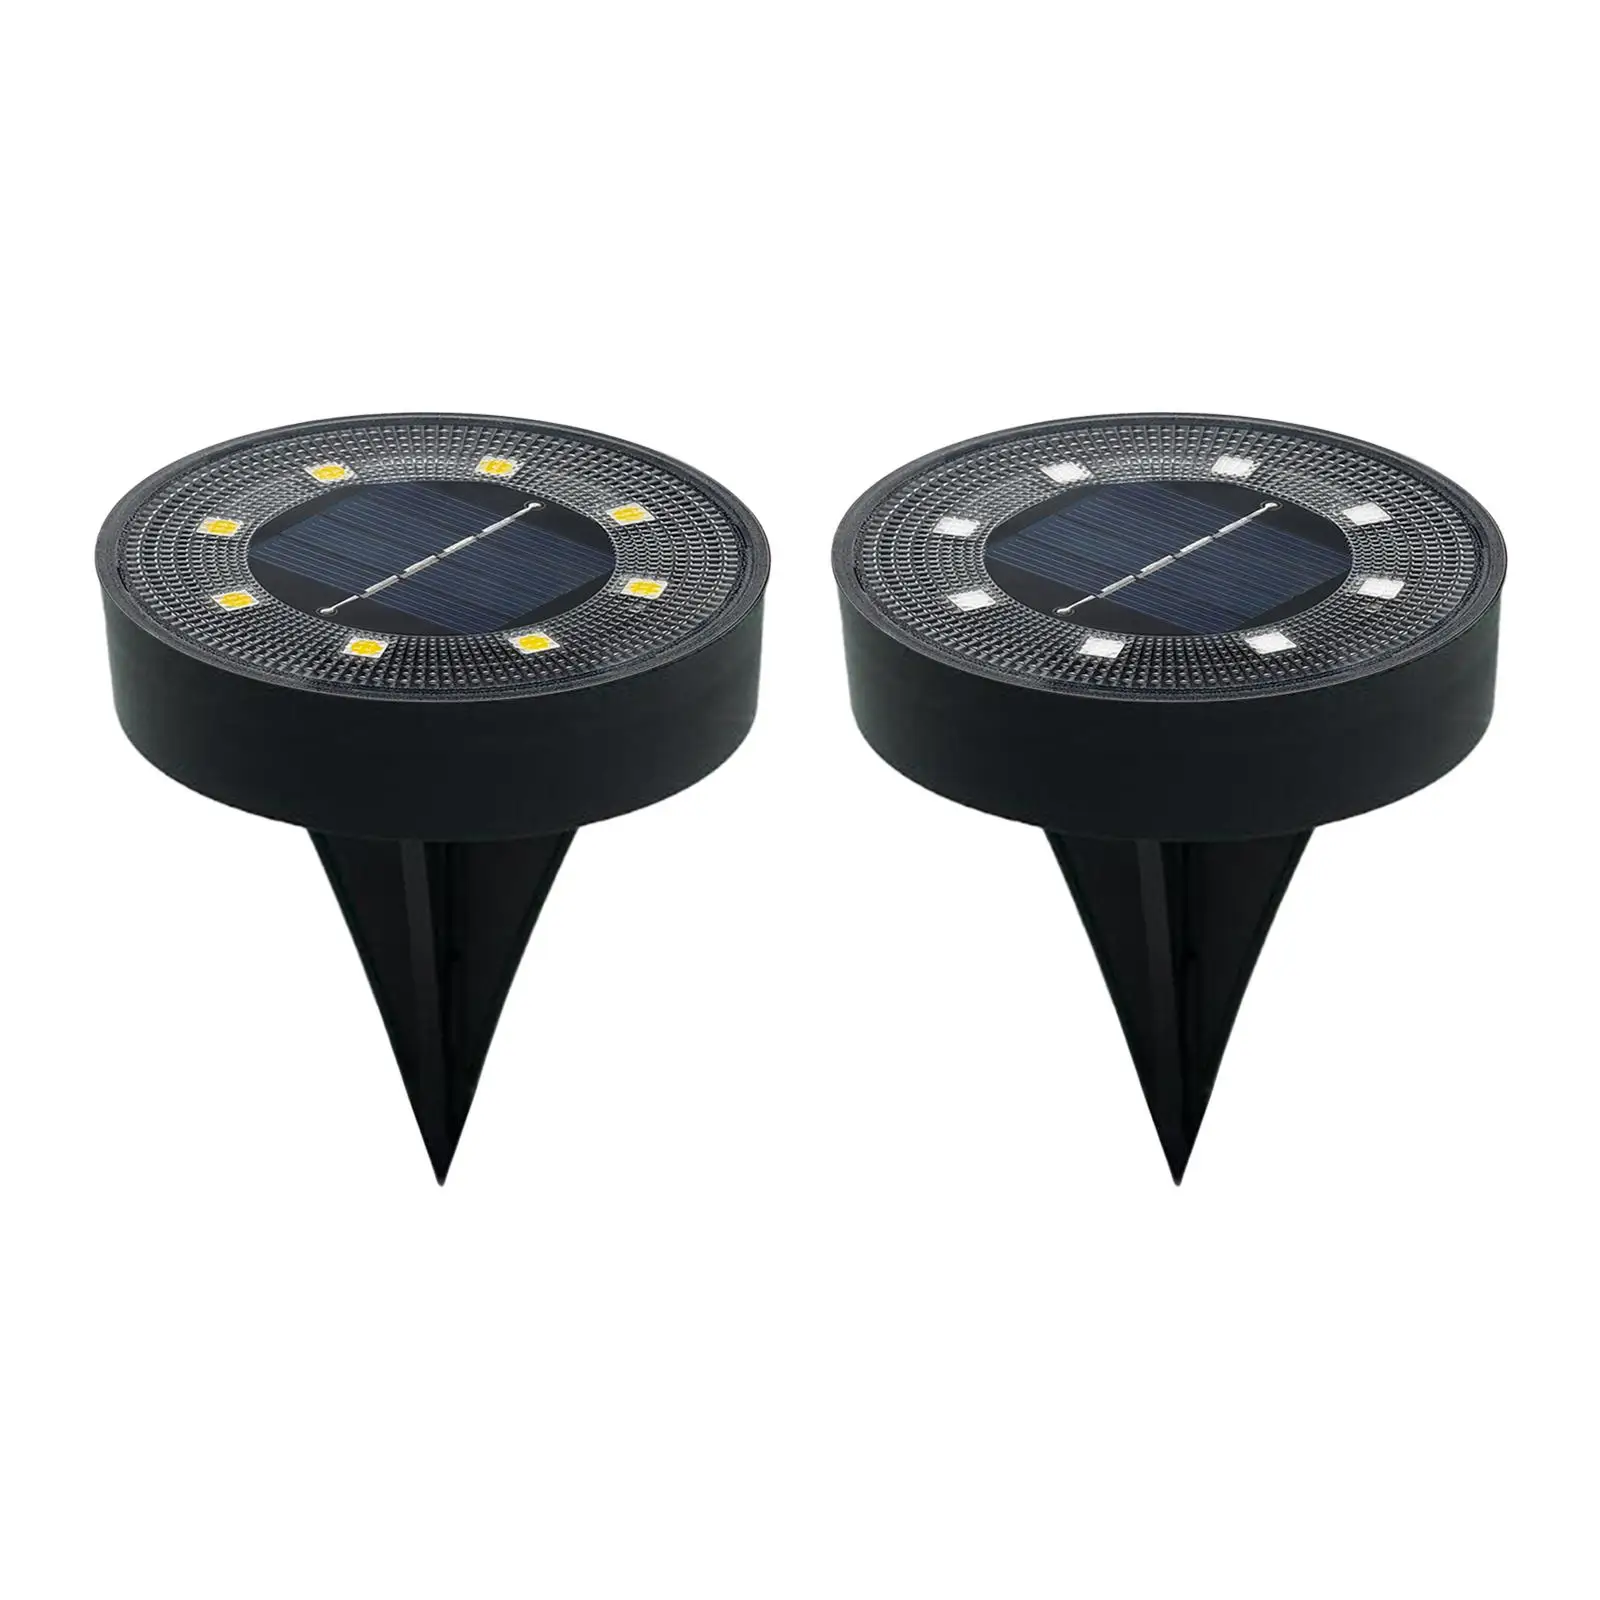 

Solar Power Ground Light Garden Decoration Lamp LED Outdoor Solar Powered Disk Light for Yard Walkway Pathway Driveway Deck